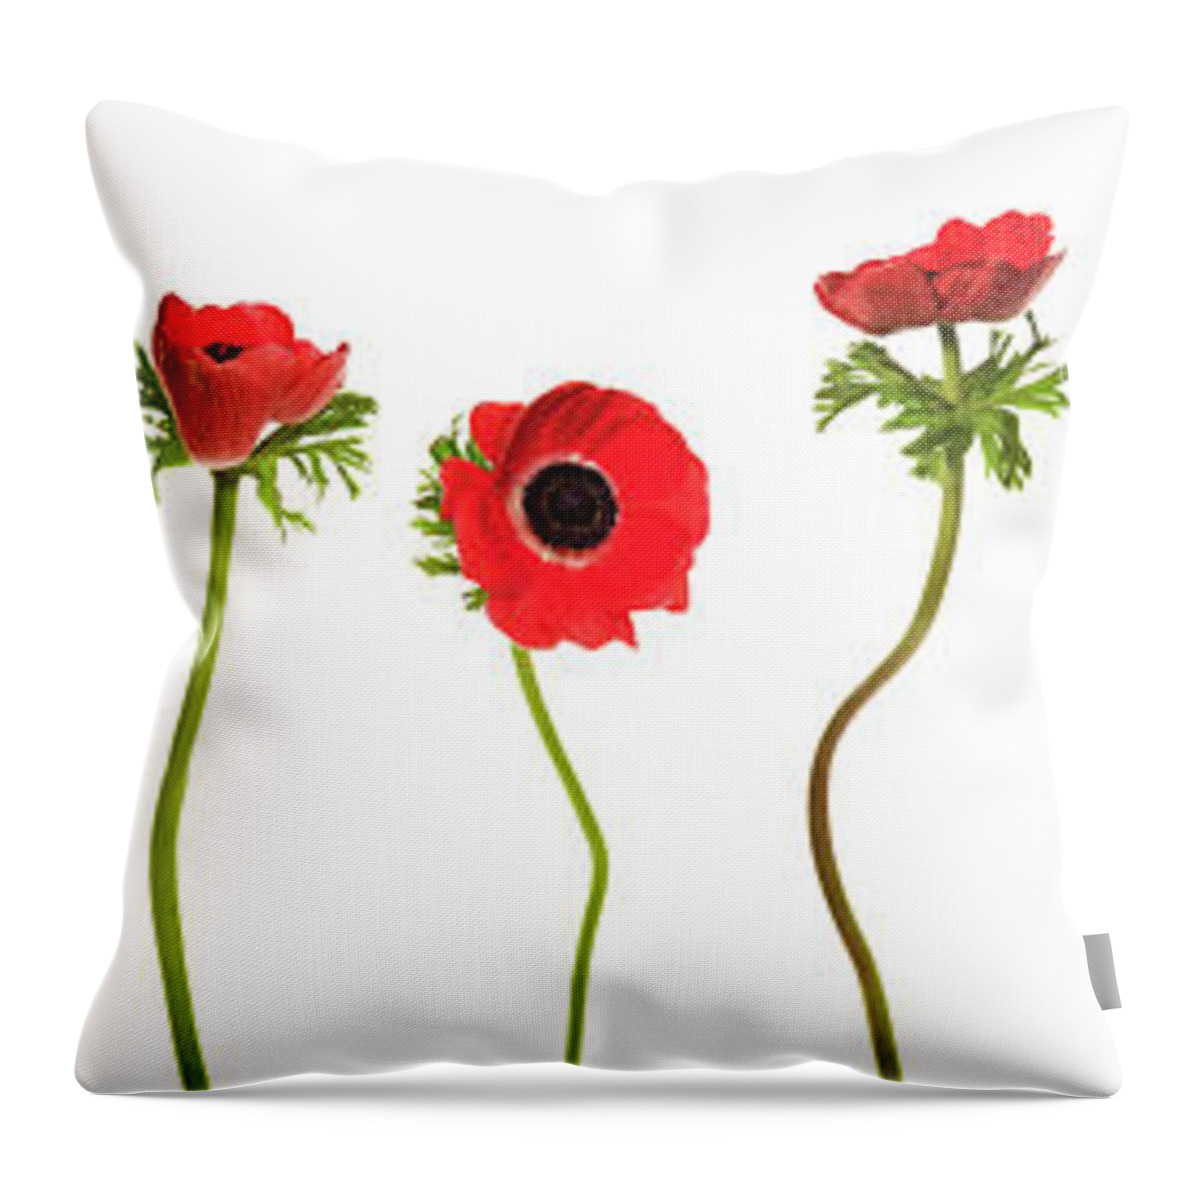 White Background Throw Pillow featuring the photograph Red Poppies Border Xxxl by Lloret